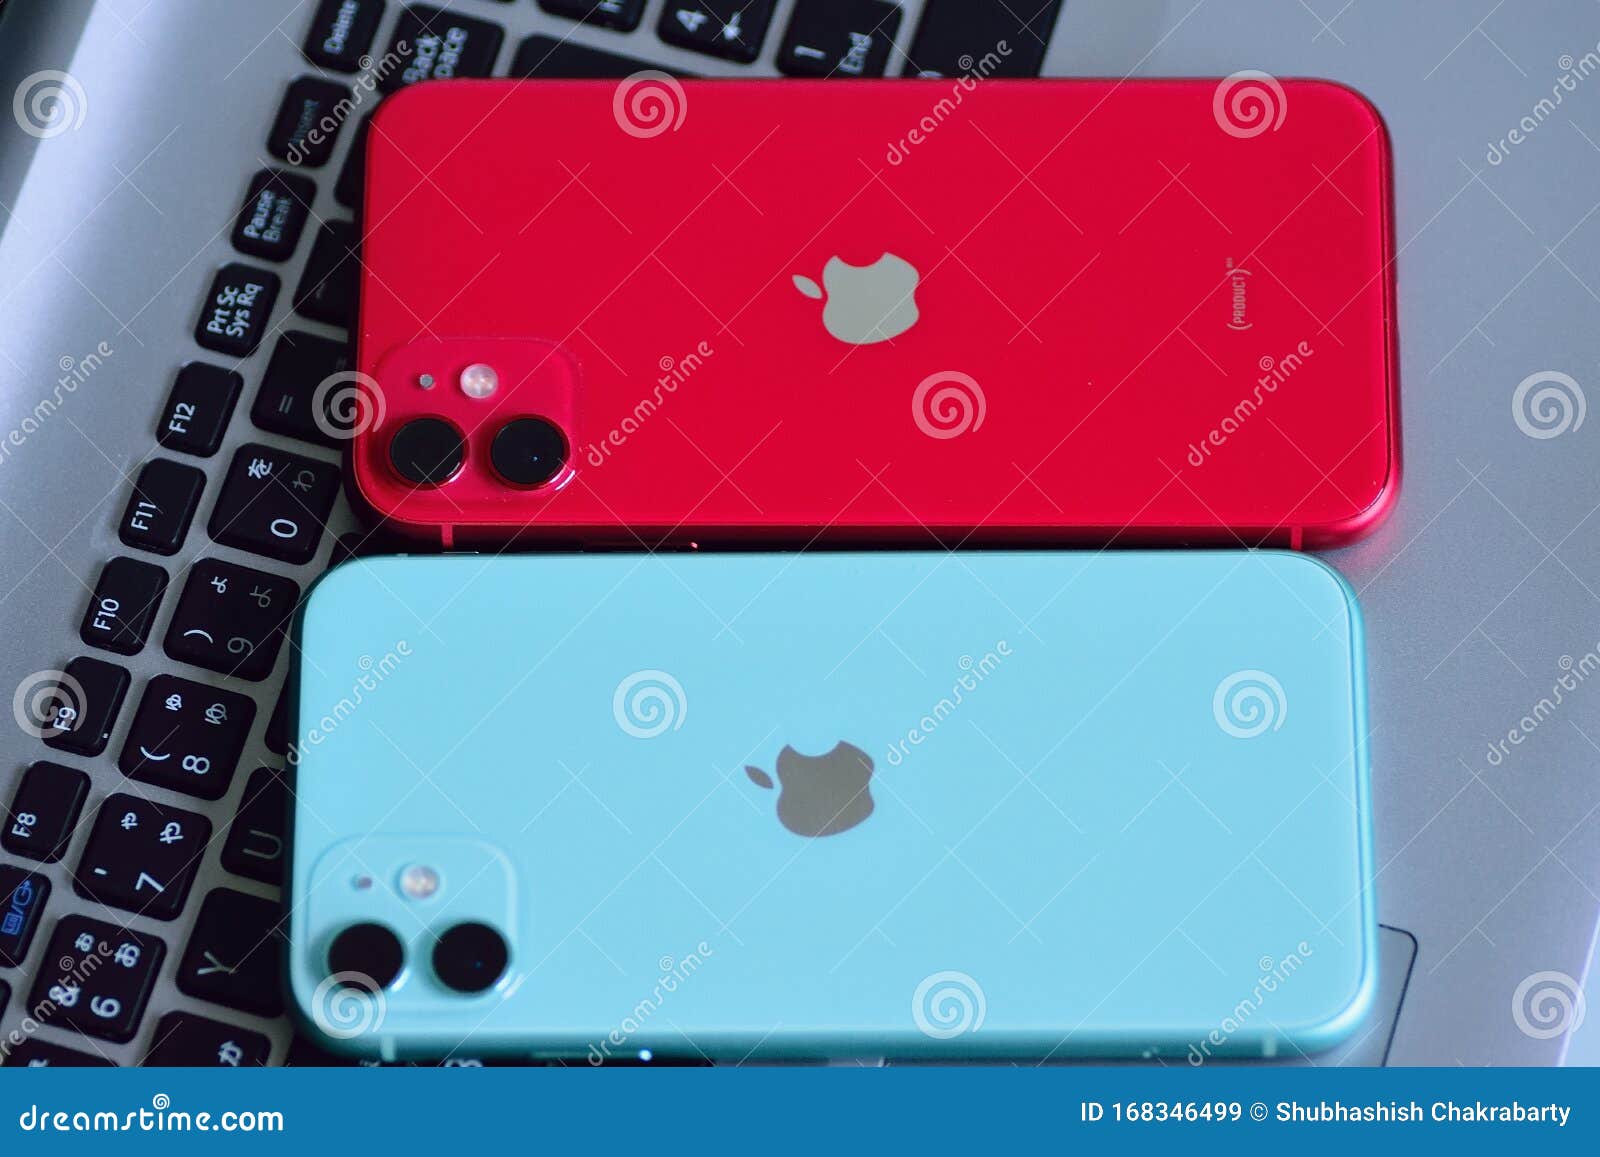 Red Mint Green Color Iphone 11 Featuring Dual Camera Editorial Stock Image Image Of Color Electronic